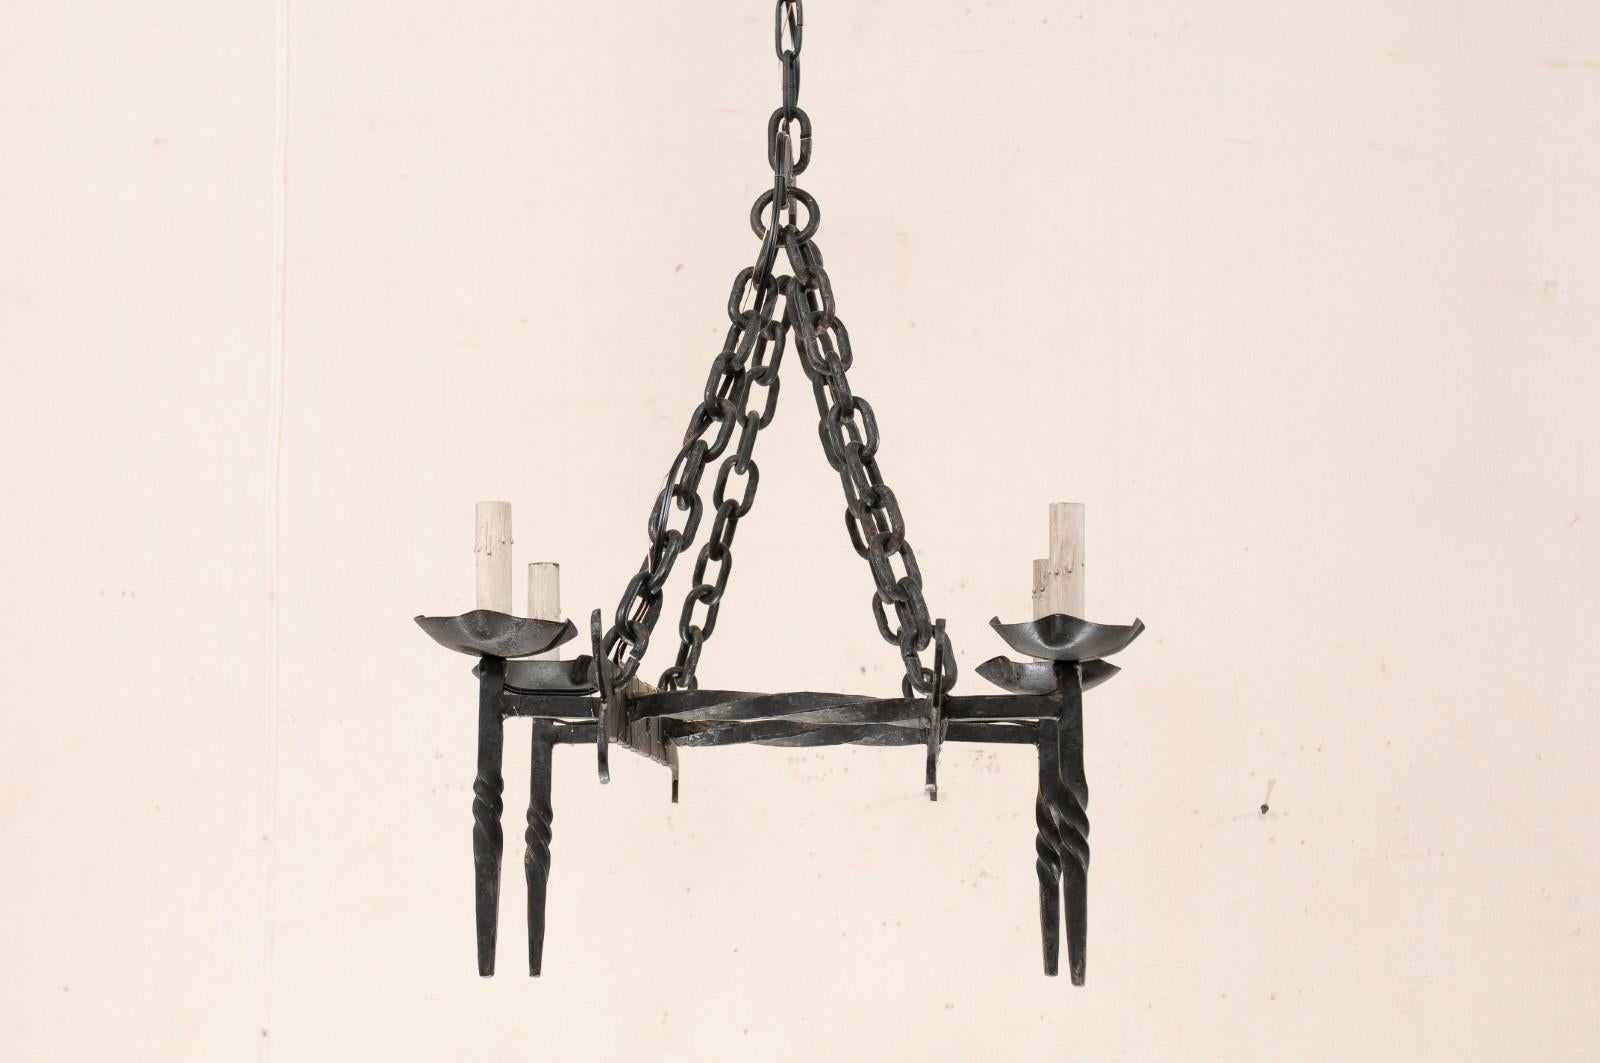 Forged French Crossed-Bar Four-Light Iron Chandelier from the Mid-20th Century For Sale